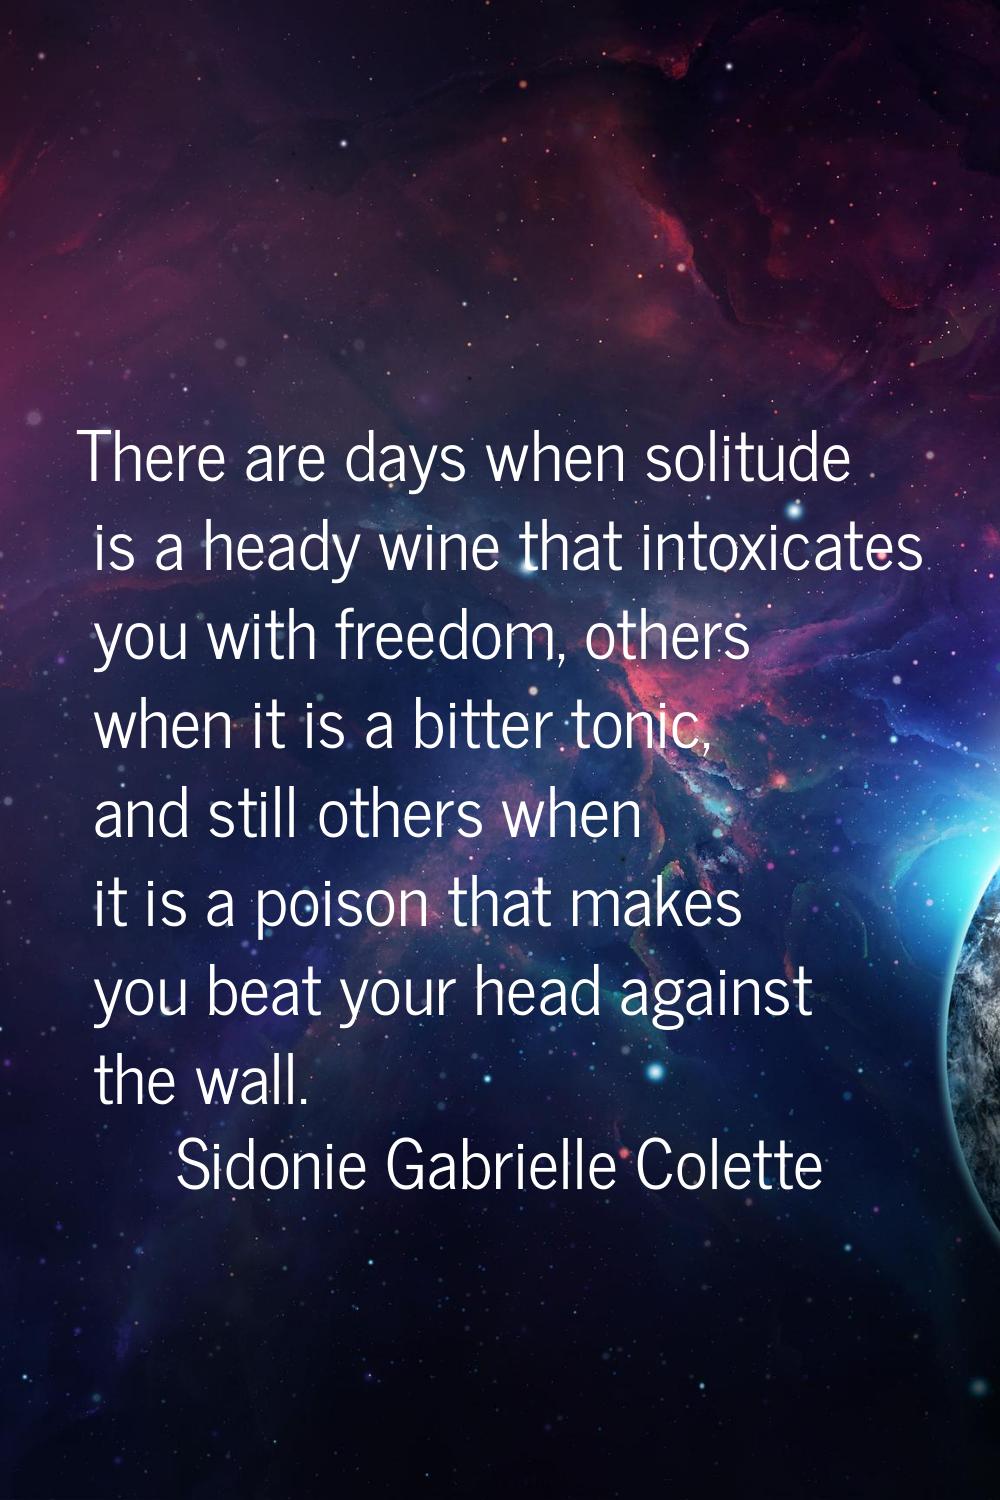 There are days when solitude is a heady wine that intoxicates you with freedom, others when it is a